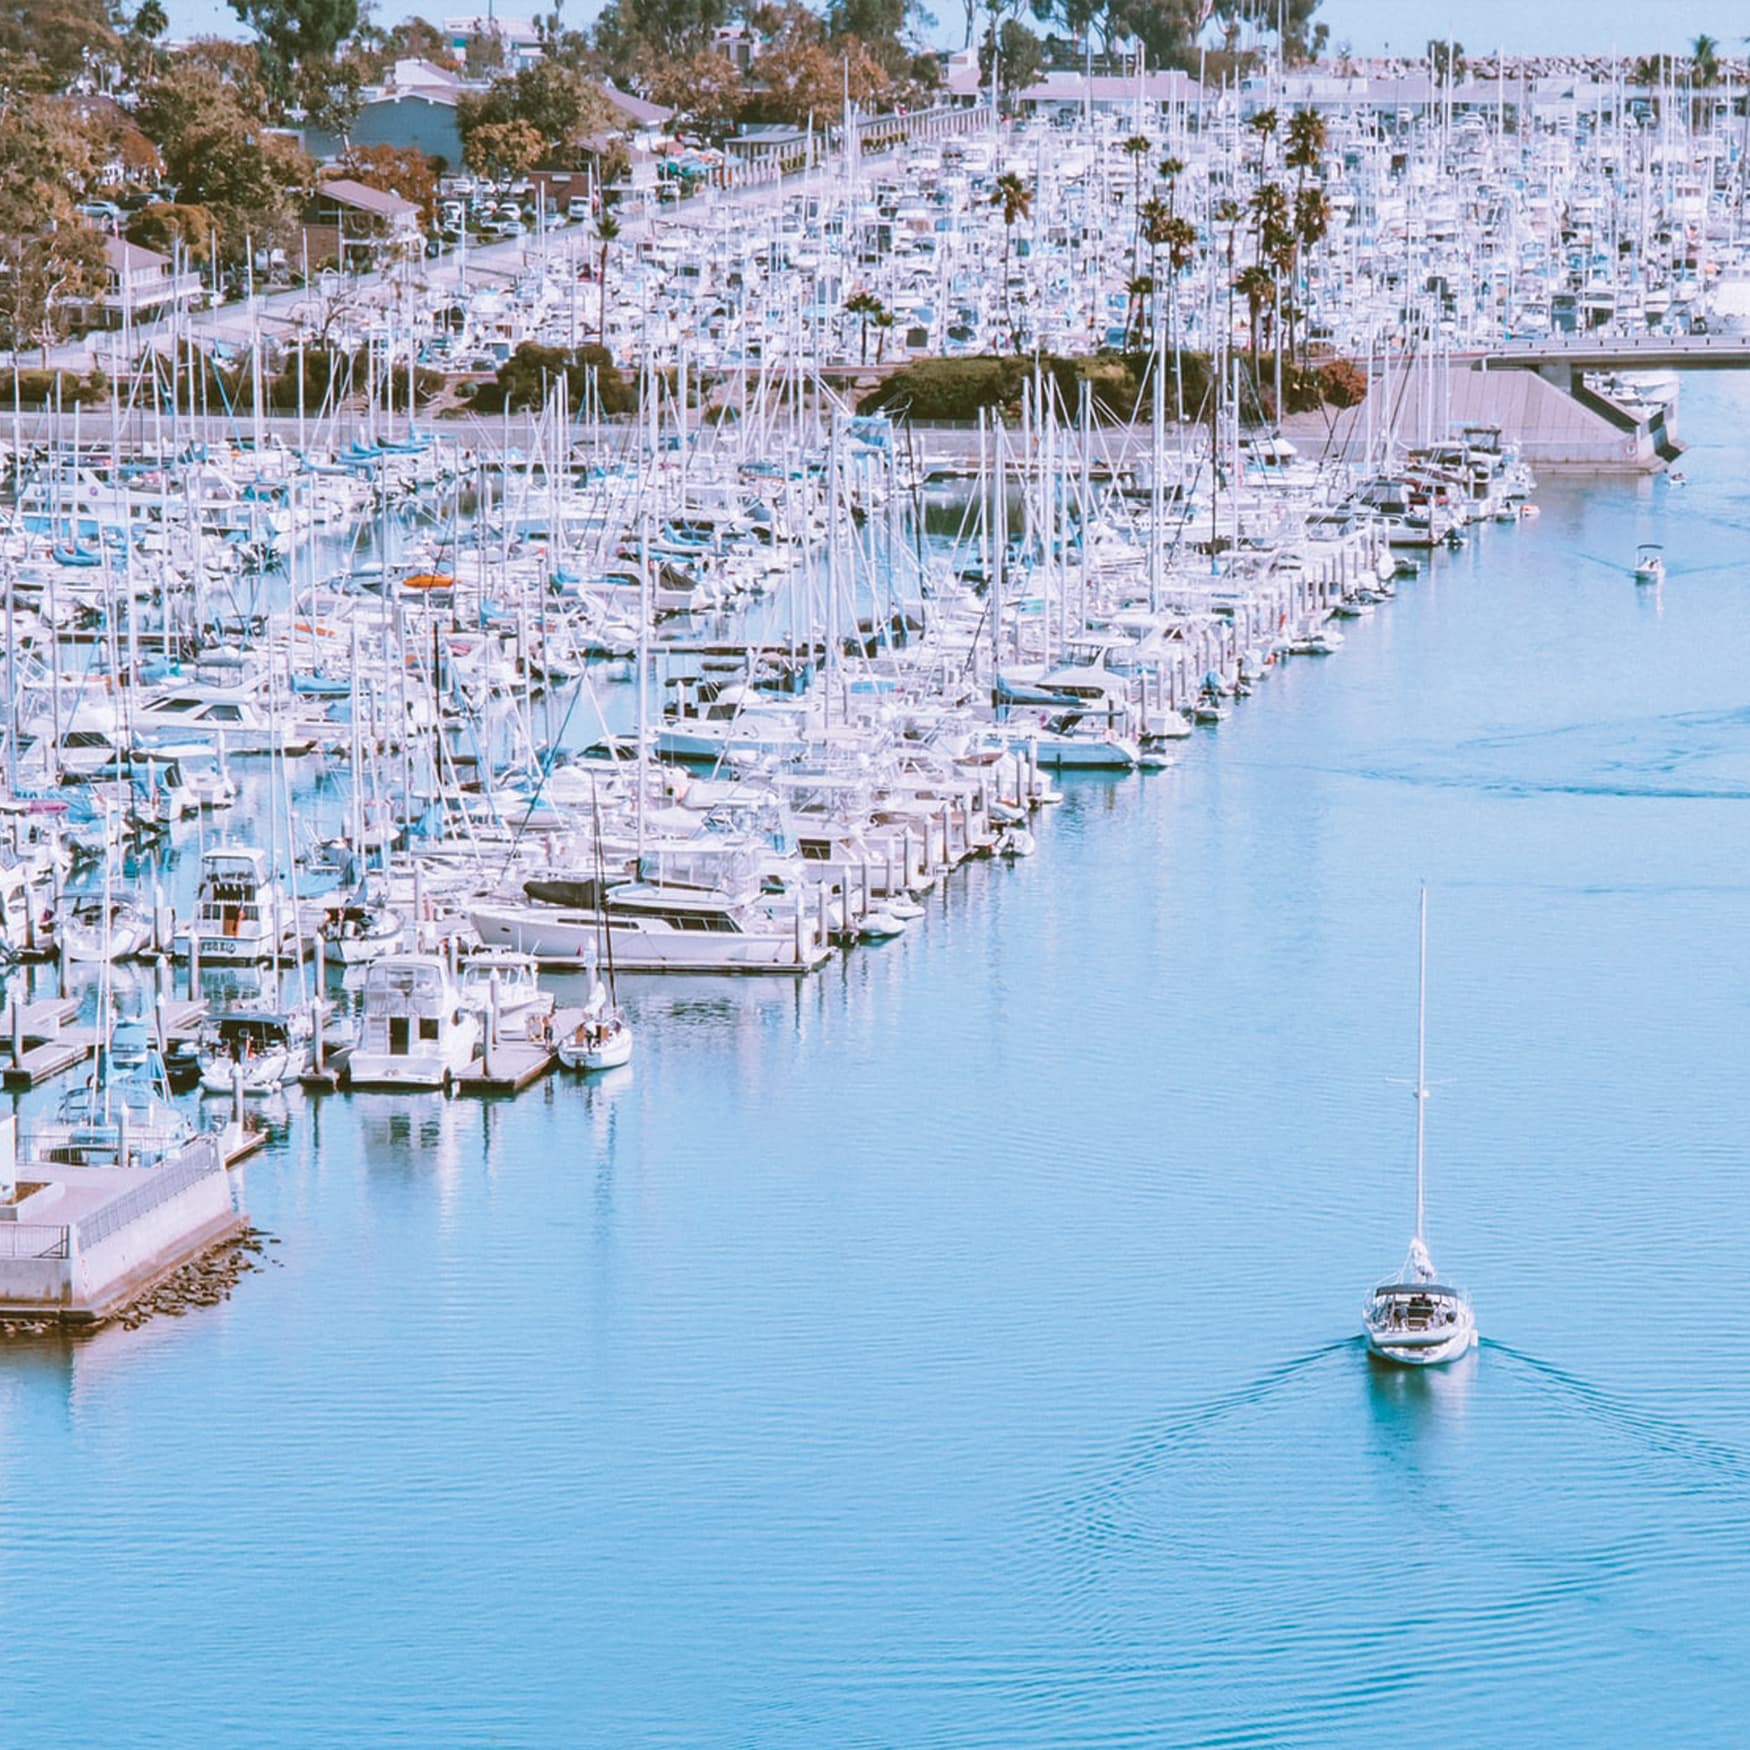 A boat sailing through the main lane at Dana Point Harbor with the current waterfront retail and restaurants in the background.